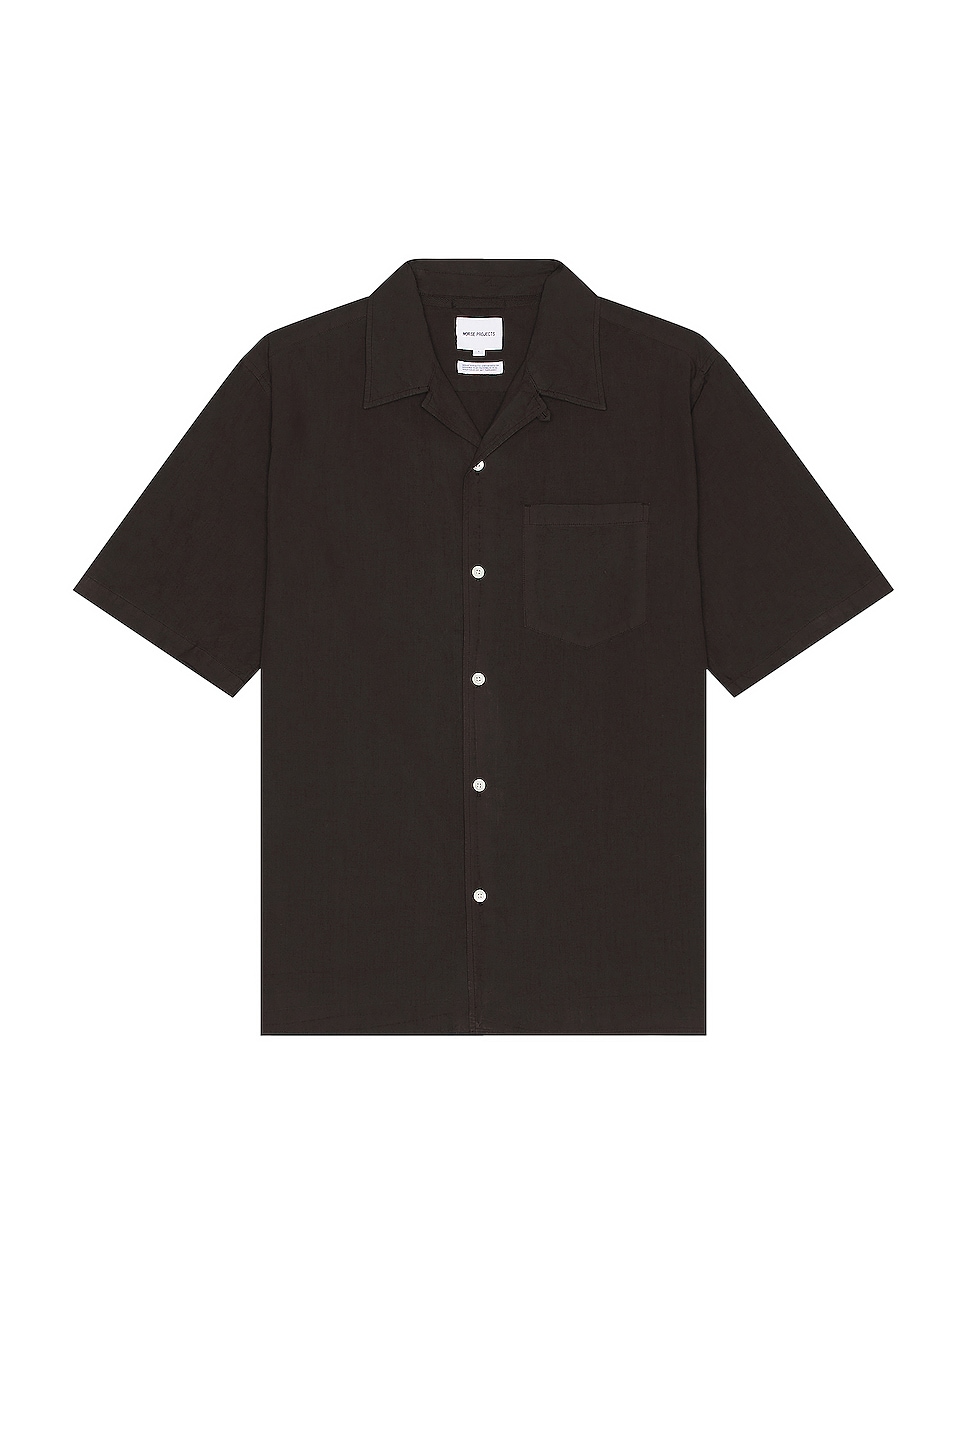 Image 1 of Norse Projects Carsten Cotton Tencel Shirt in Espresso